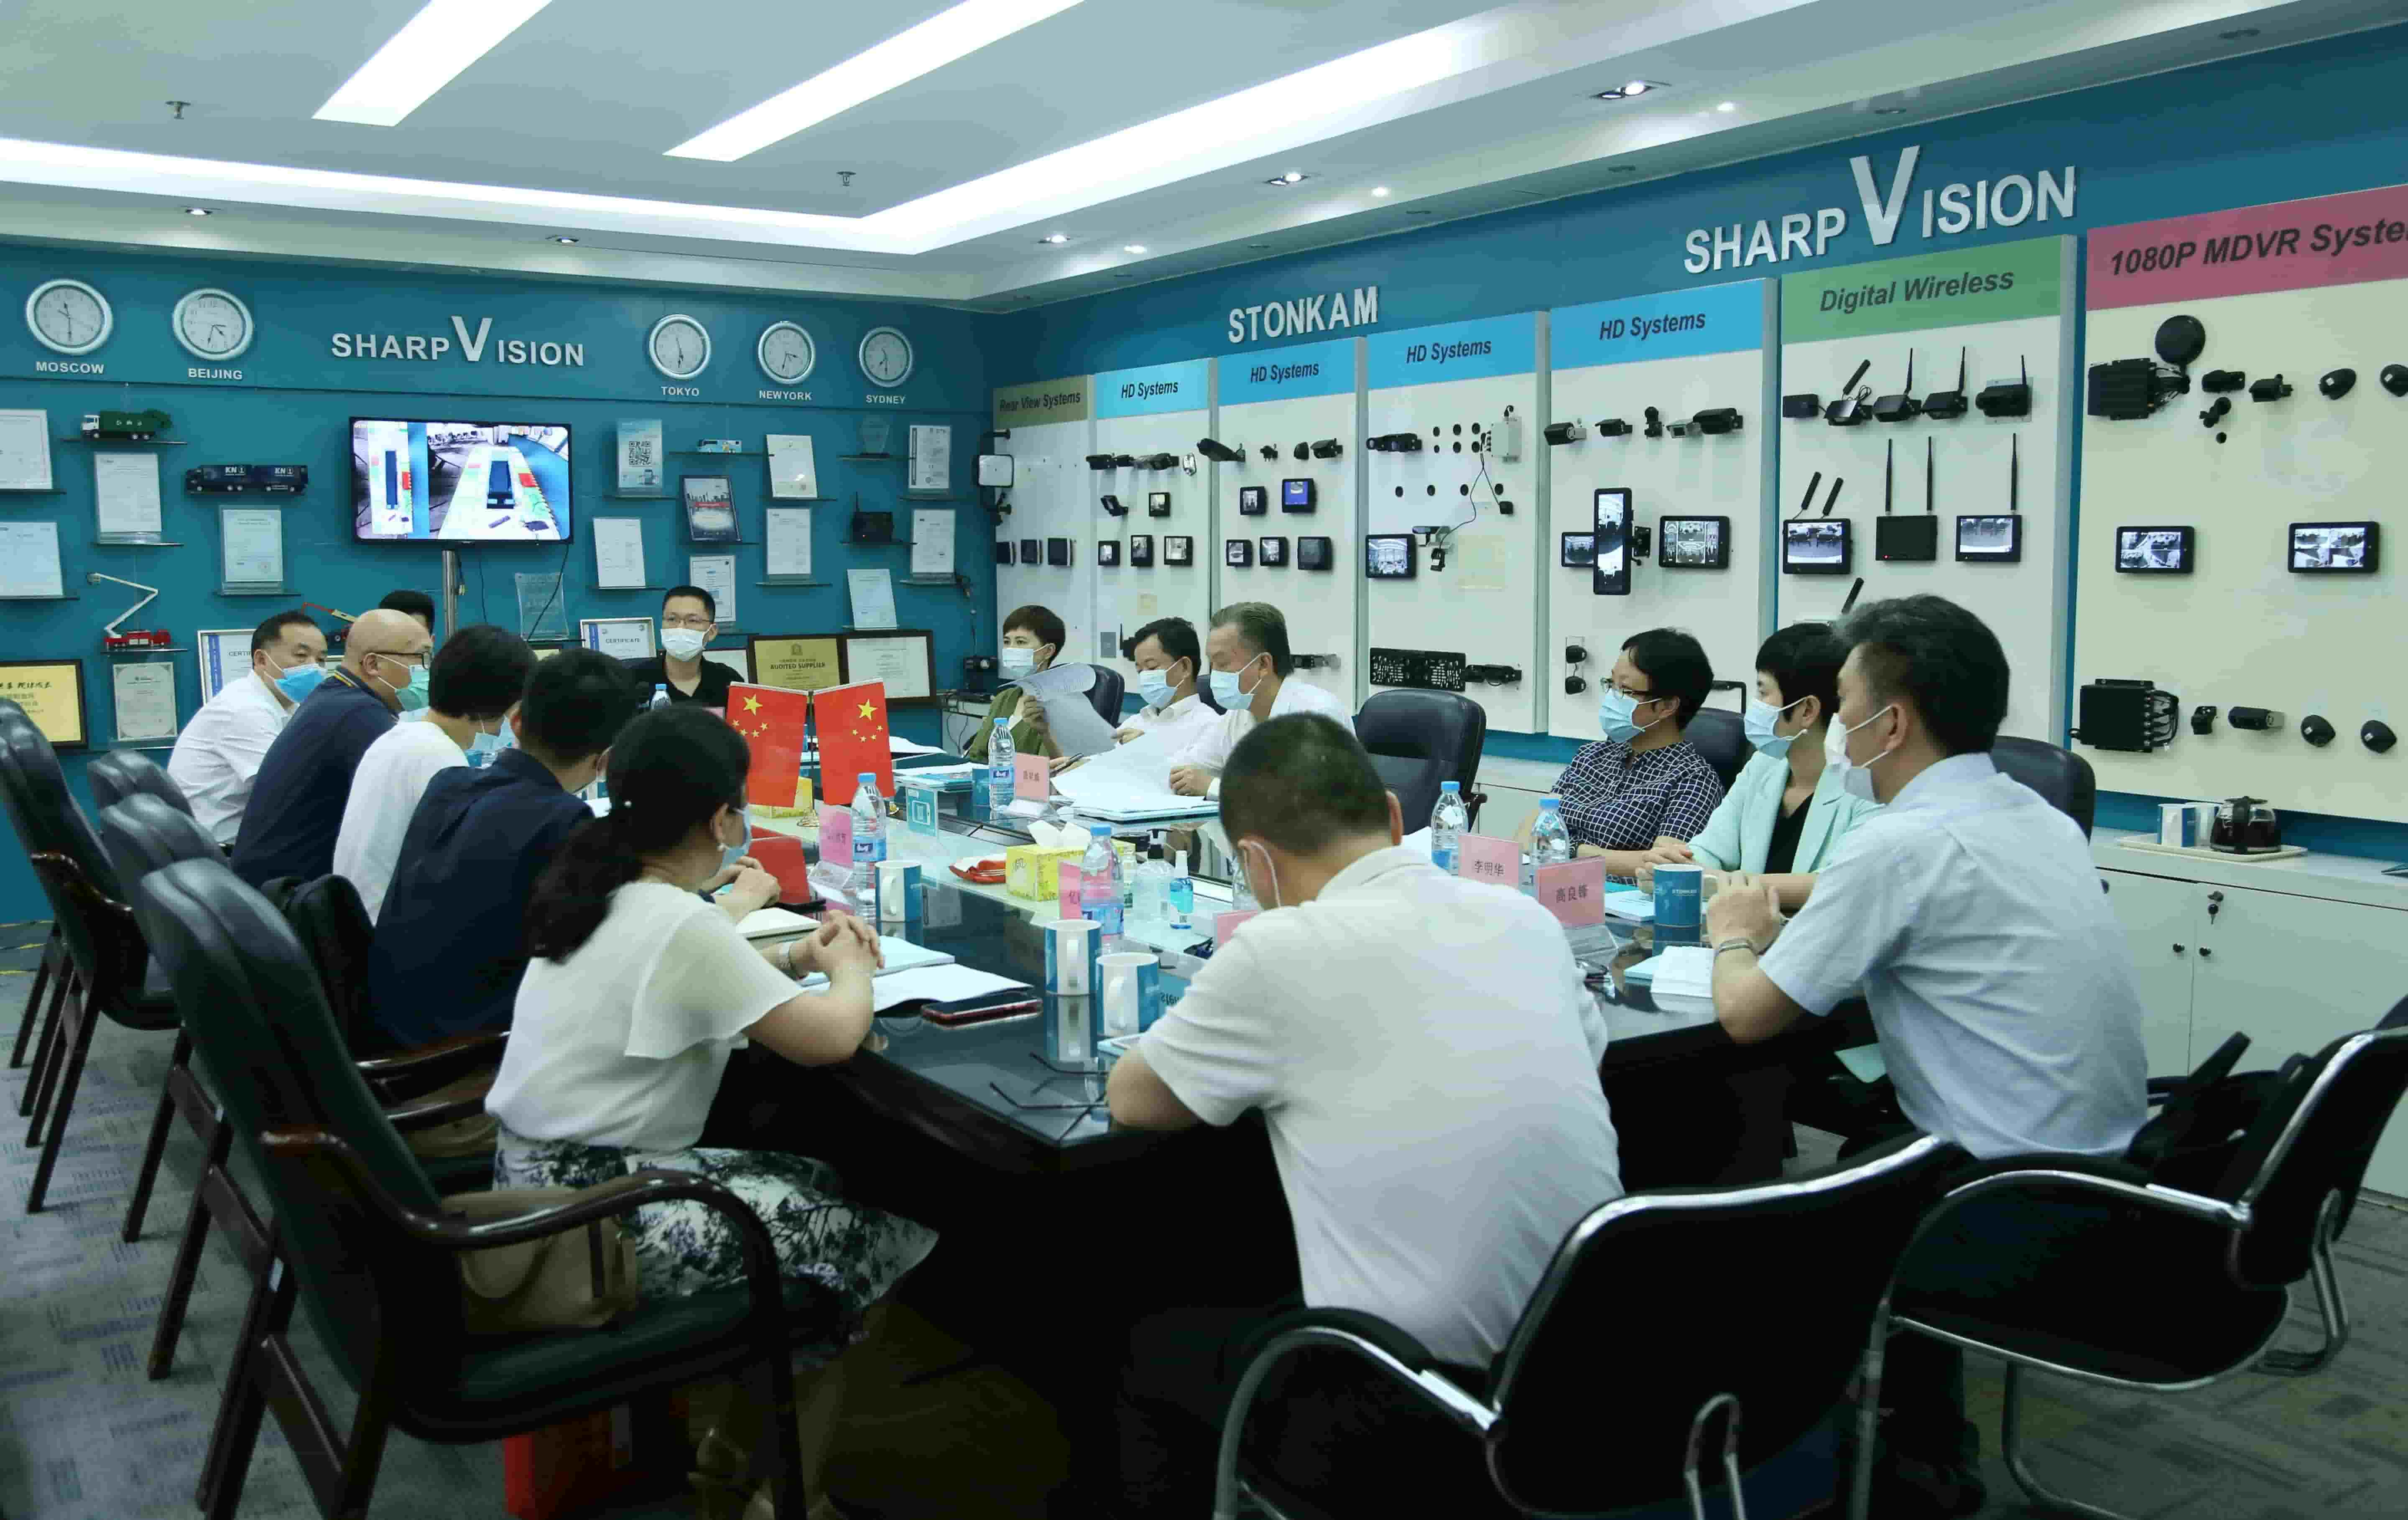 Tianhe District Head and his entourages visited STONKAM for investigation